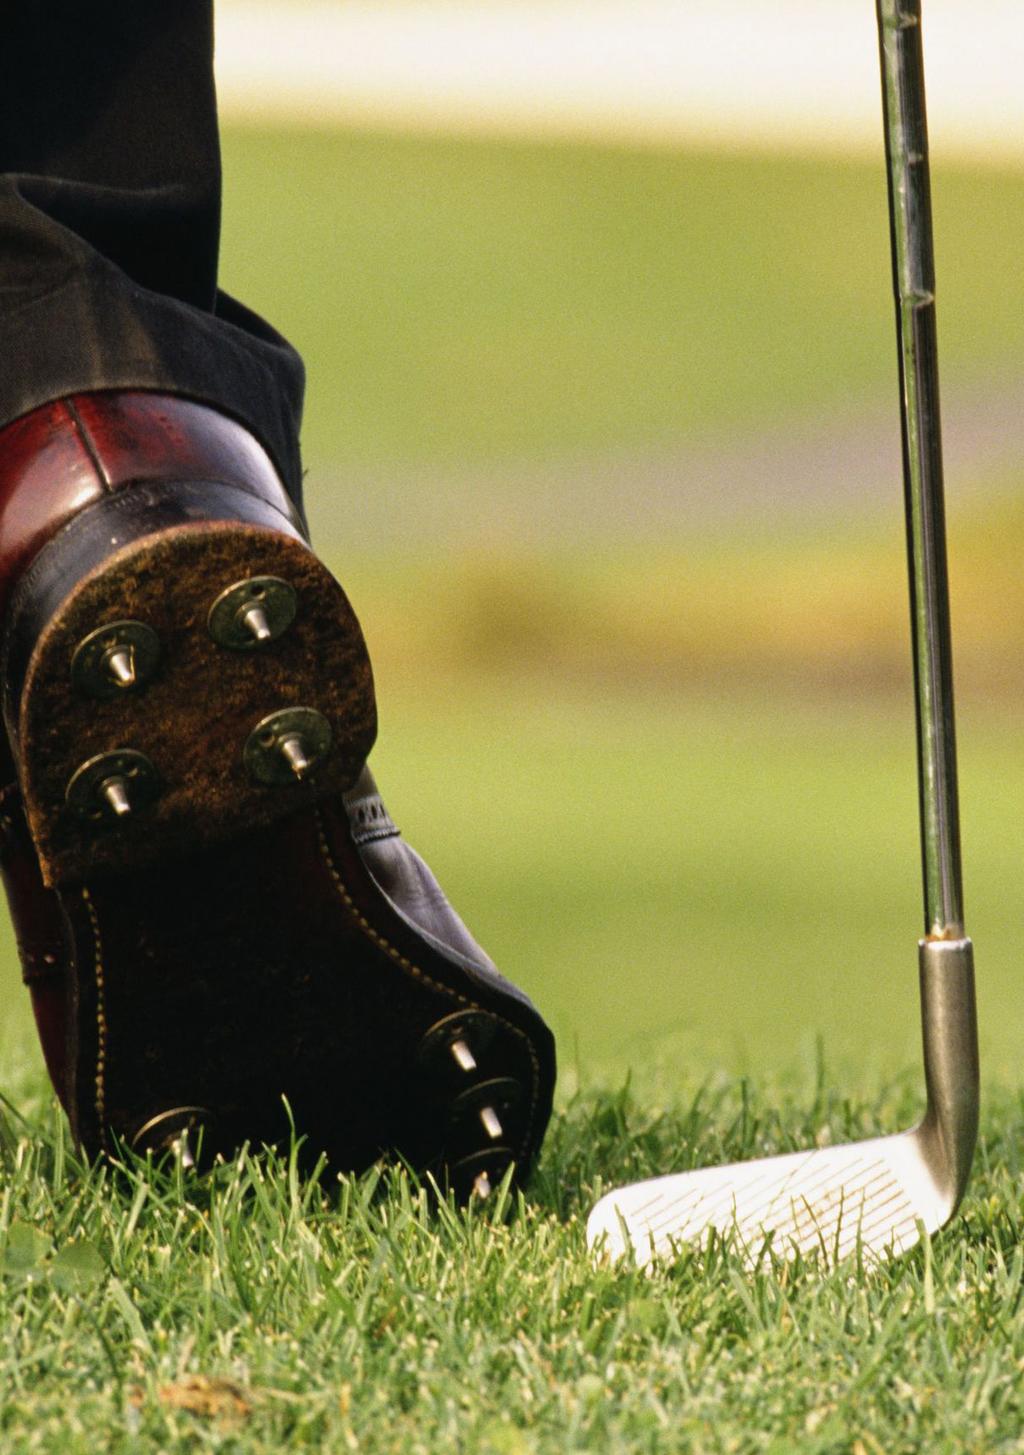 Golf club insurance with a difference We have for many years specialised in arranging insurance solutions for the UK golf industry and a number of its leading players.